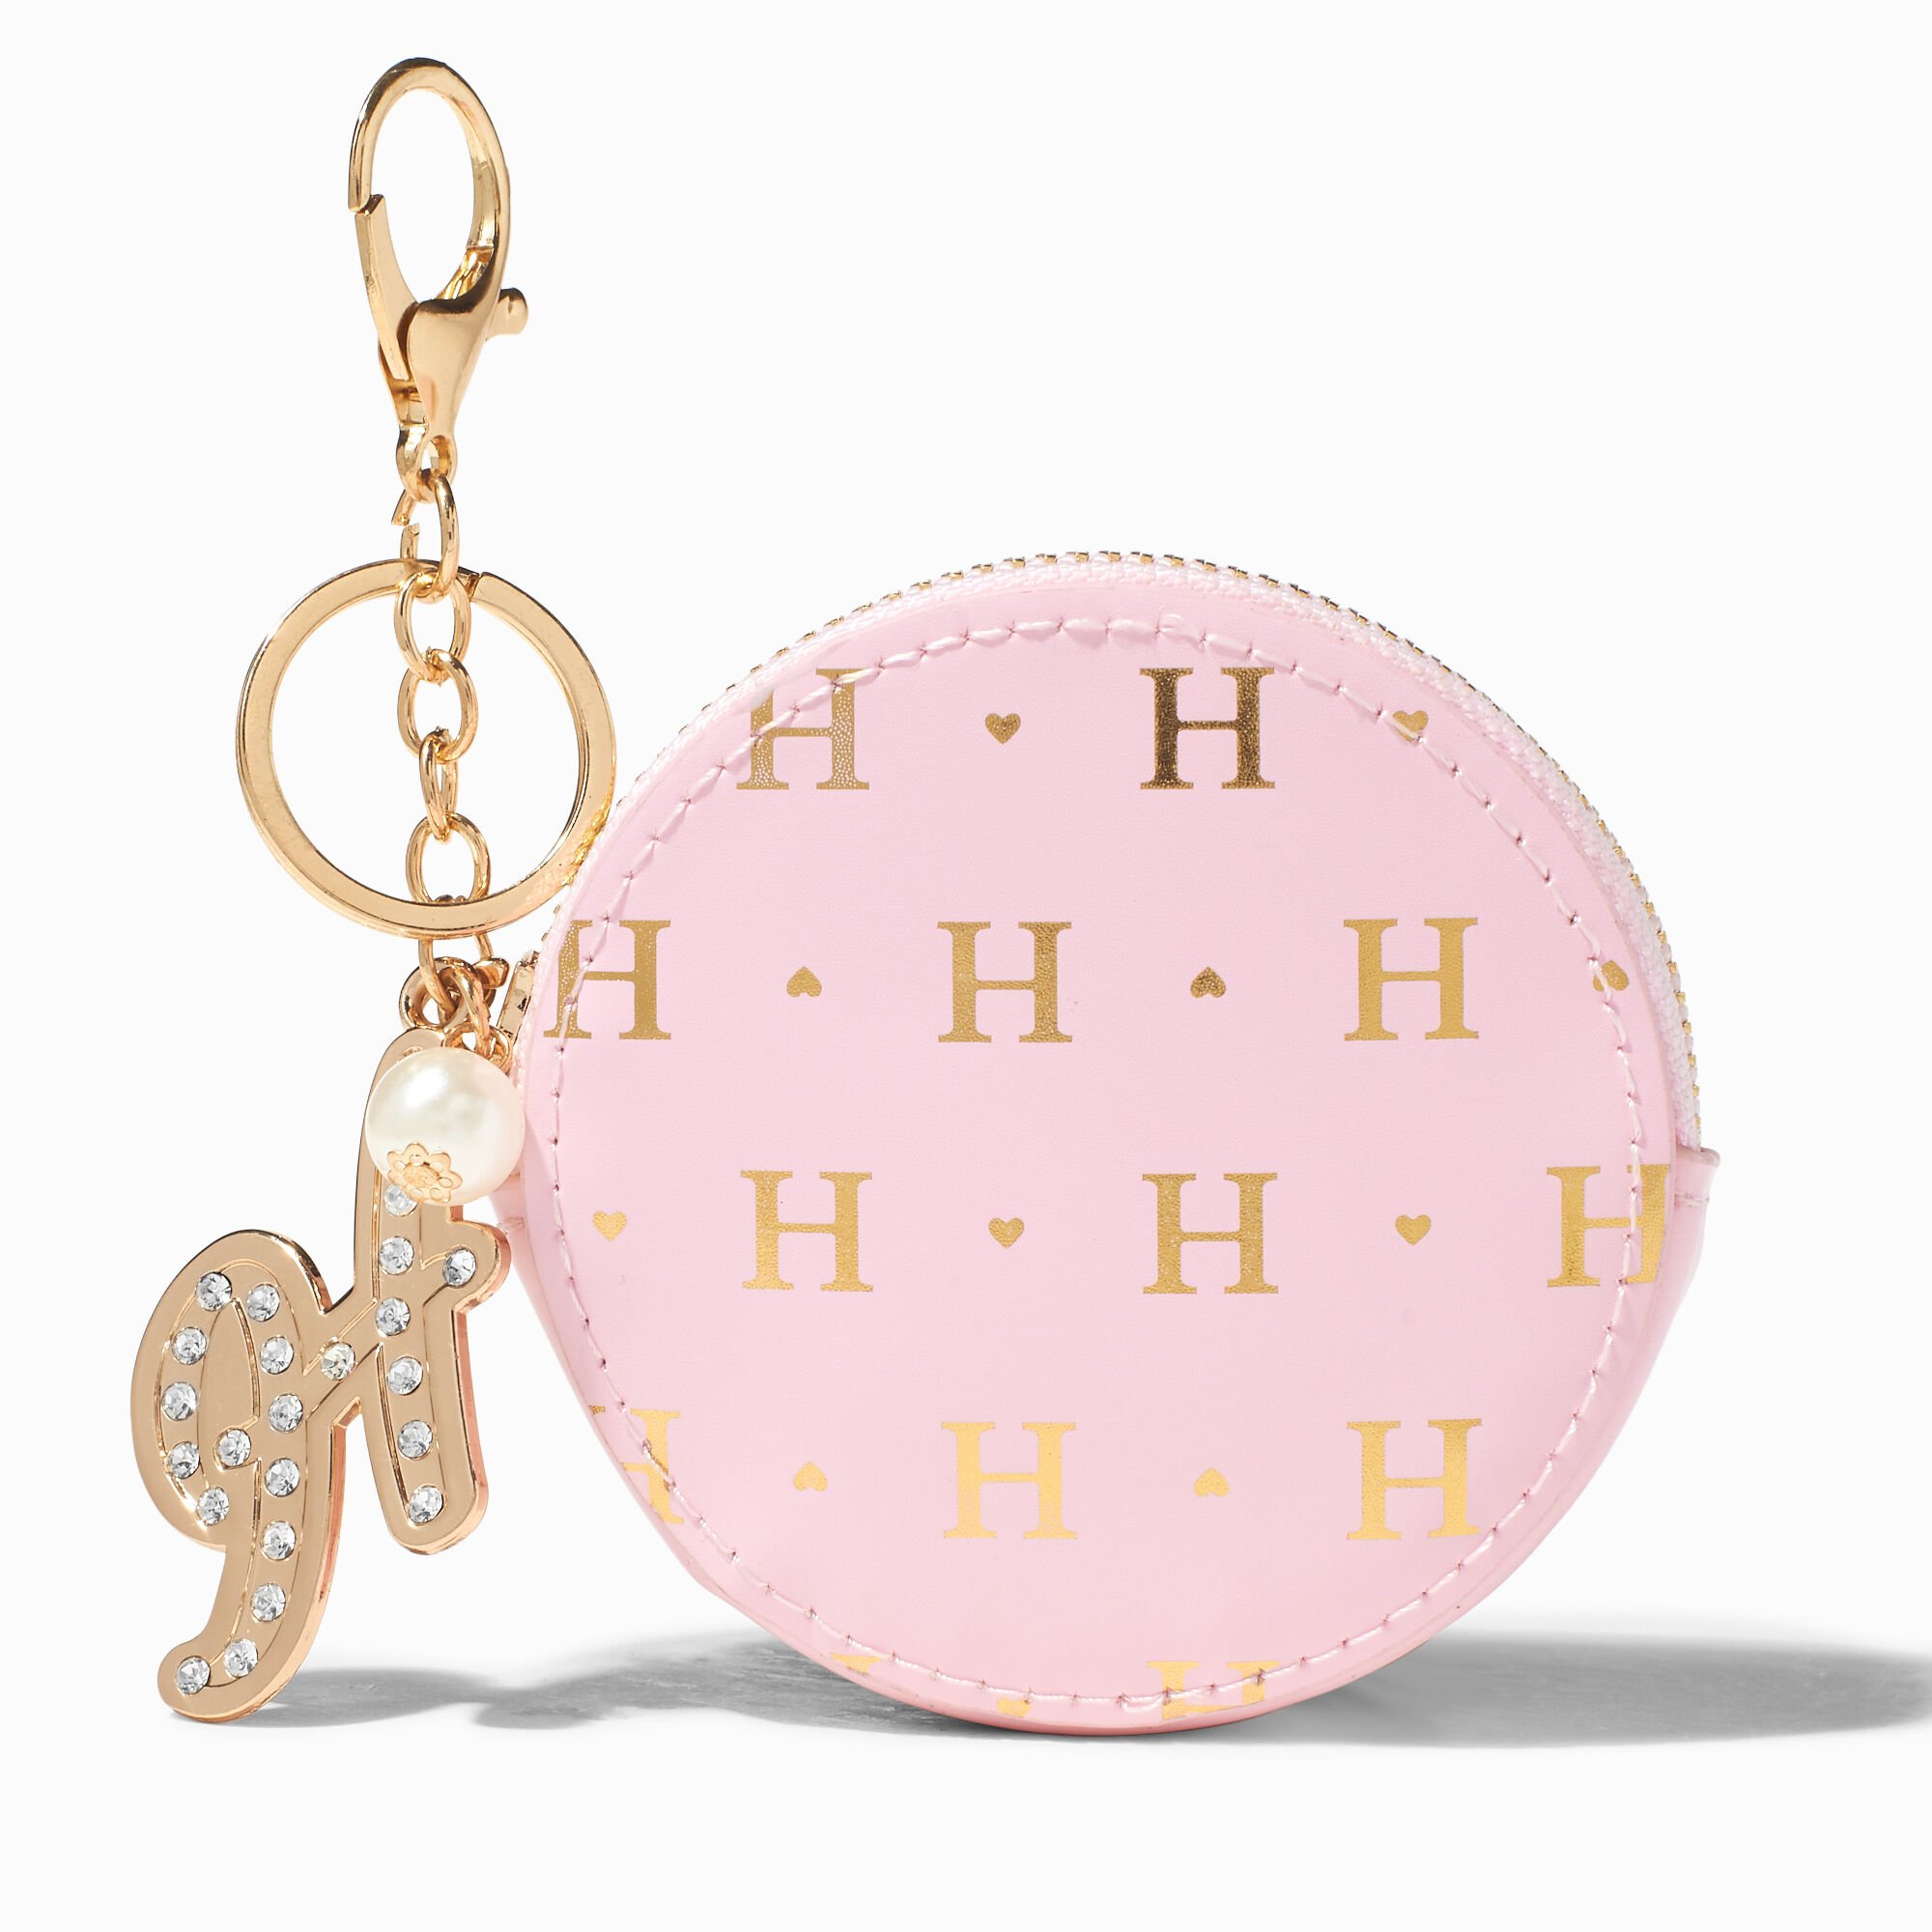 View Claires en Initial Coin Purse H Gold information